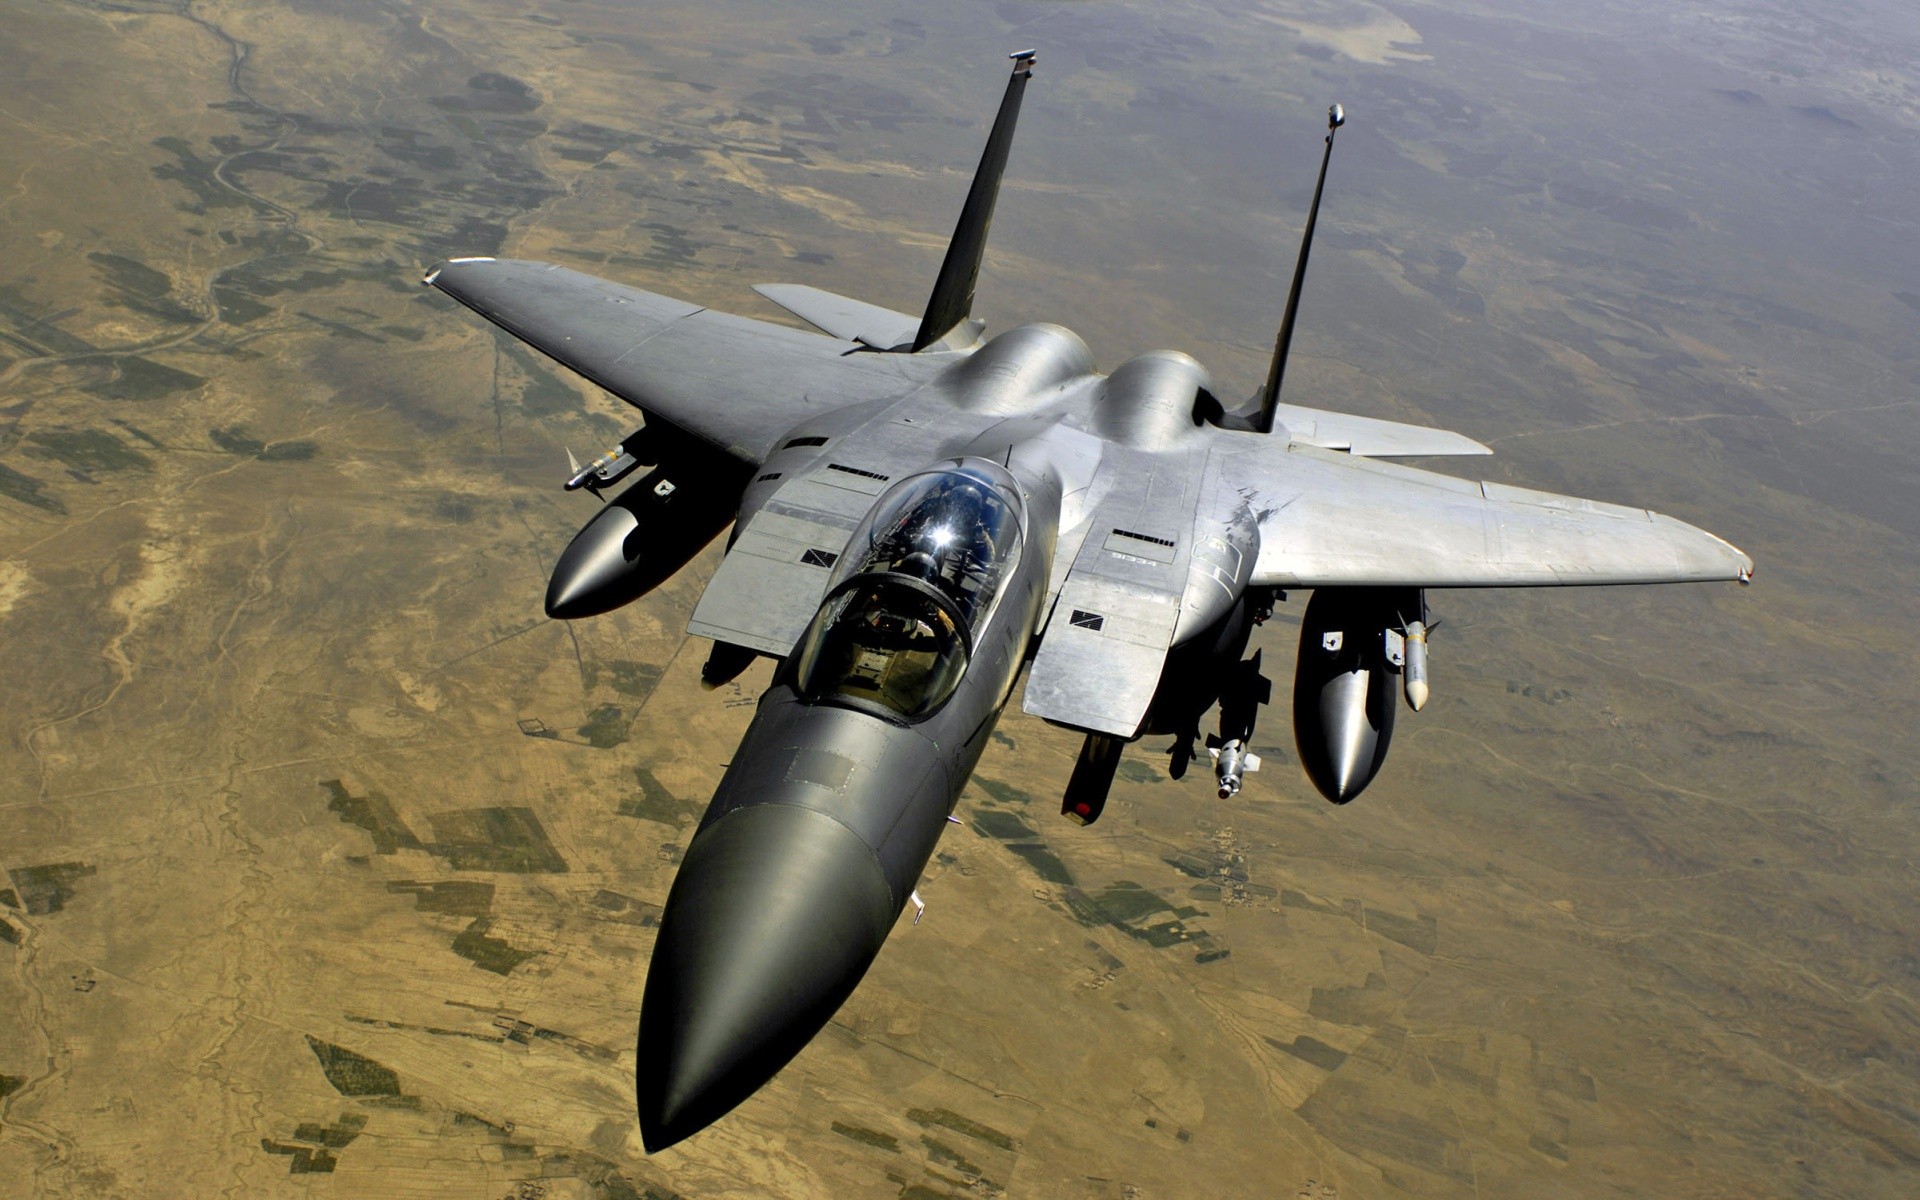 General 1920x1200 military aircraft military aircraft F-15 Eagle vehicle military vehicle McDonnell Douglas jets landscape jet fighter American aircraft sky frontal view pilot